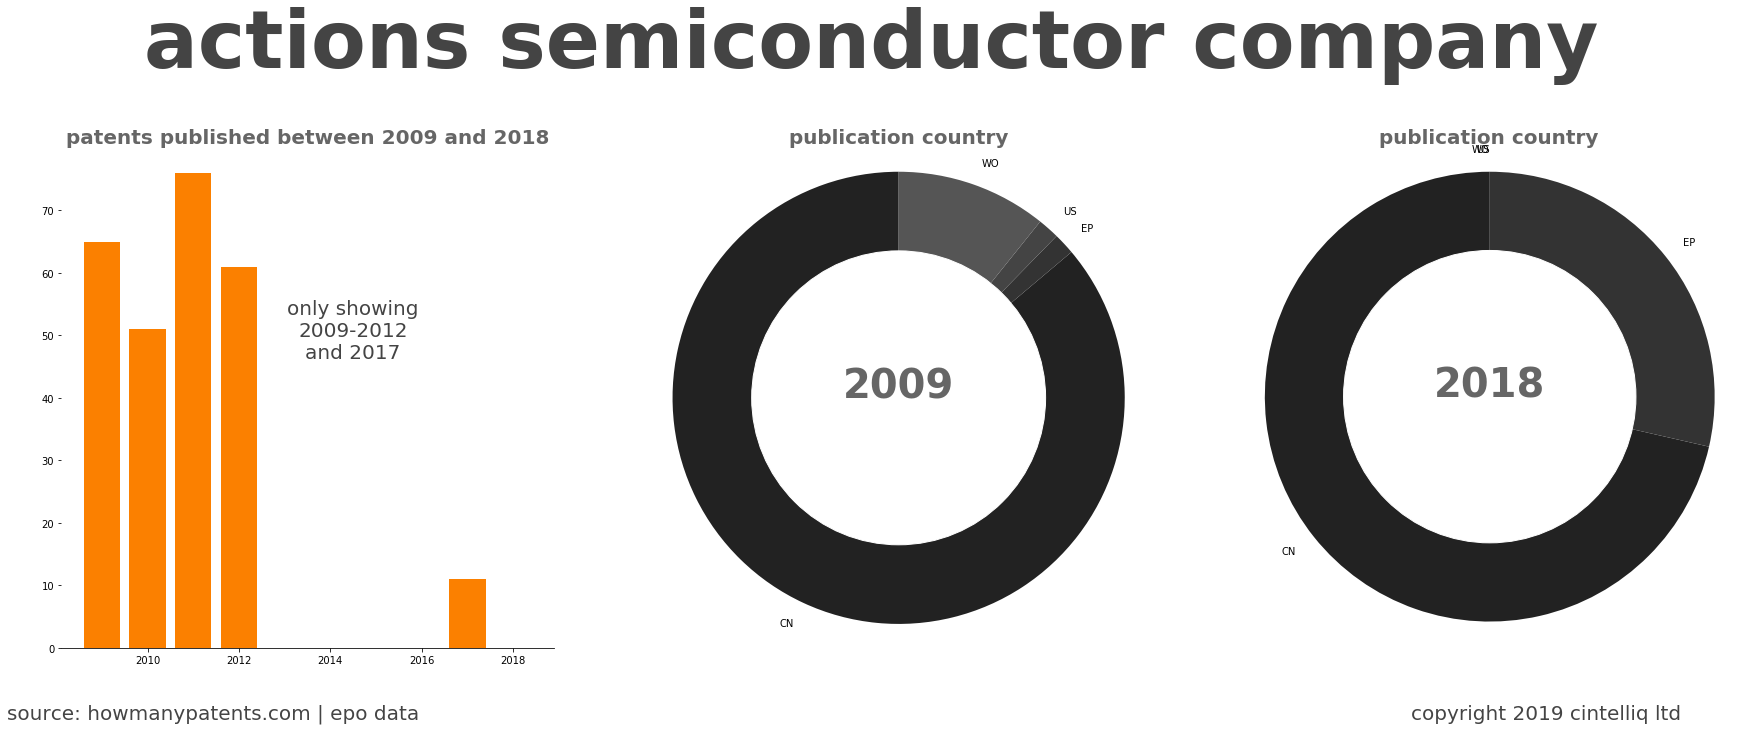 summary of patents for Actions Semiconductor Company